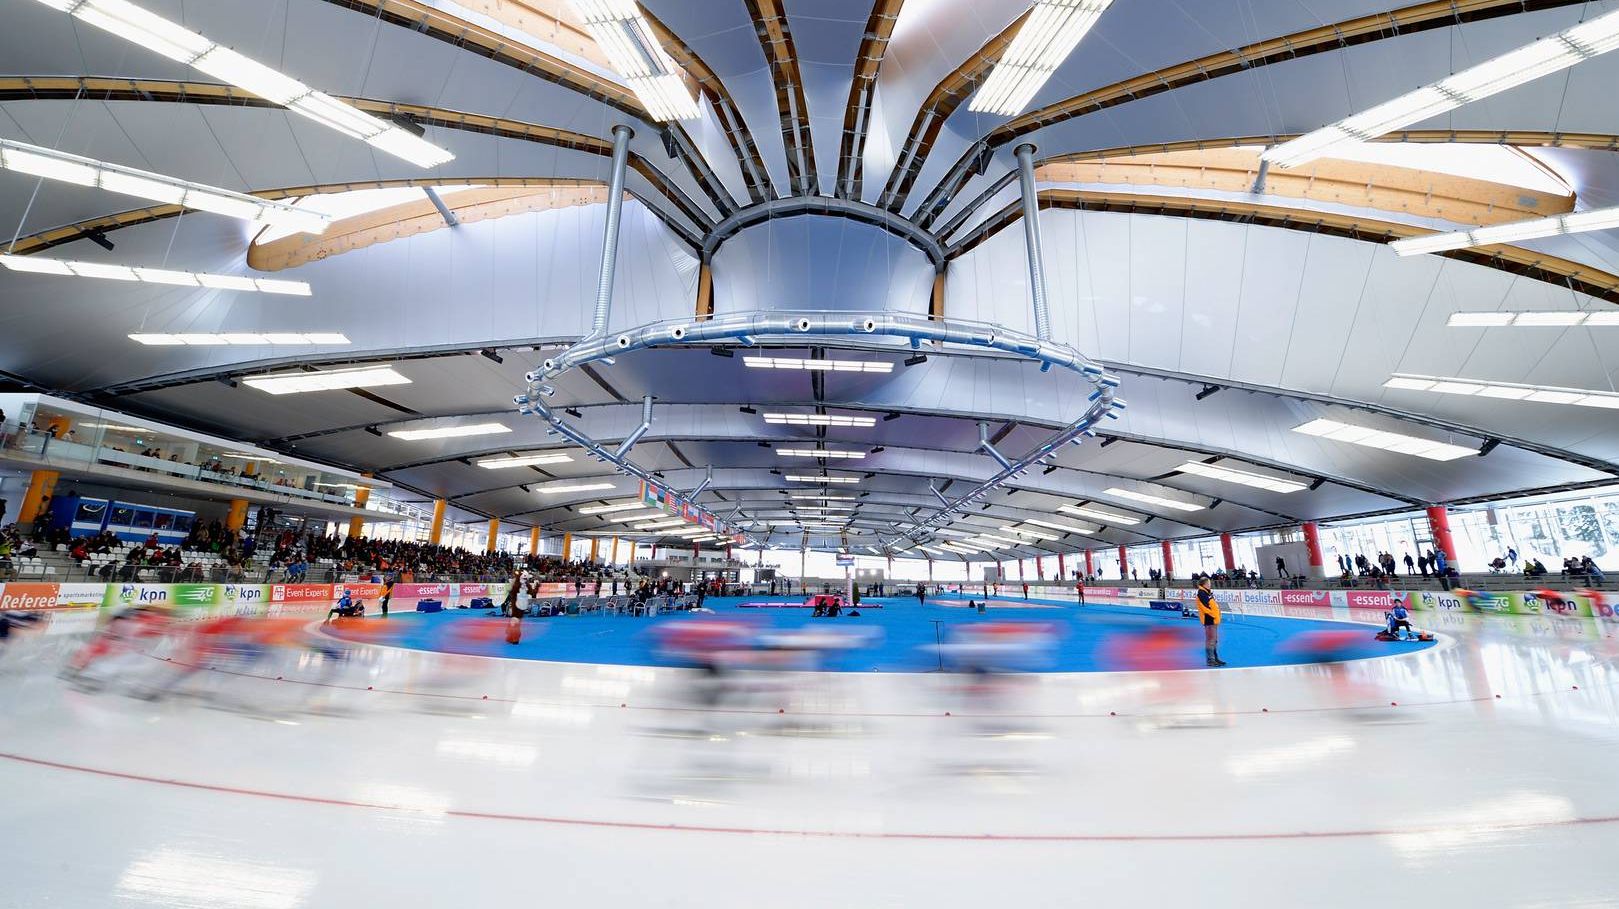 Max Aicher Arena during the ISU World Cup Speed Skating in Inzell (GER) 2013©Bongarts